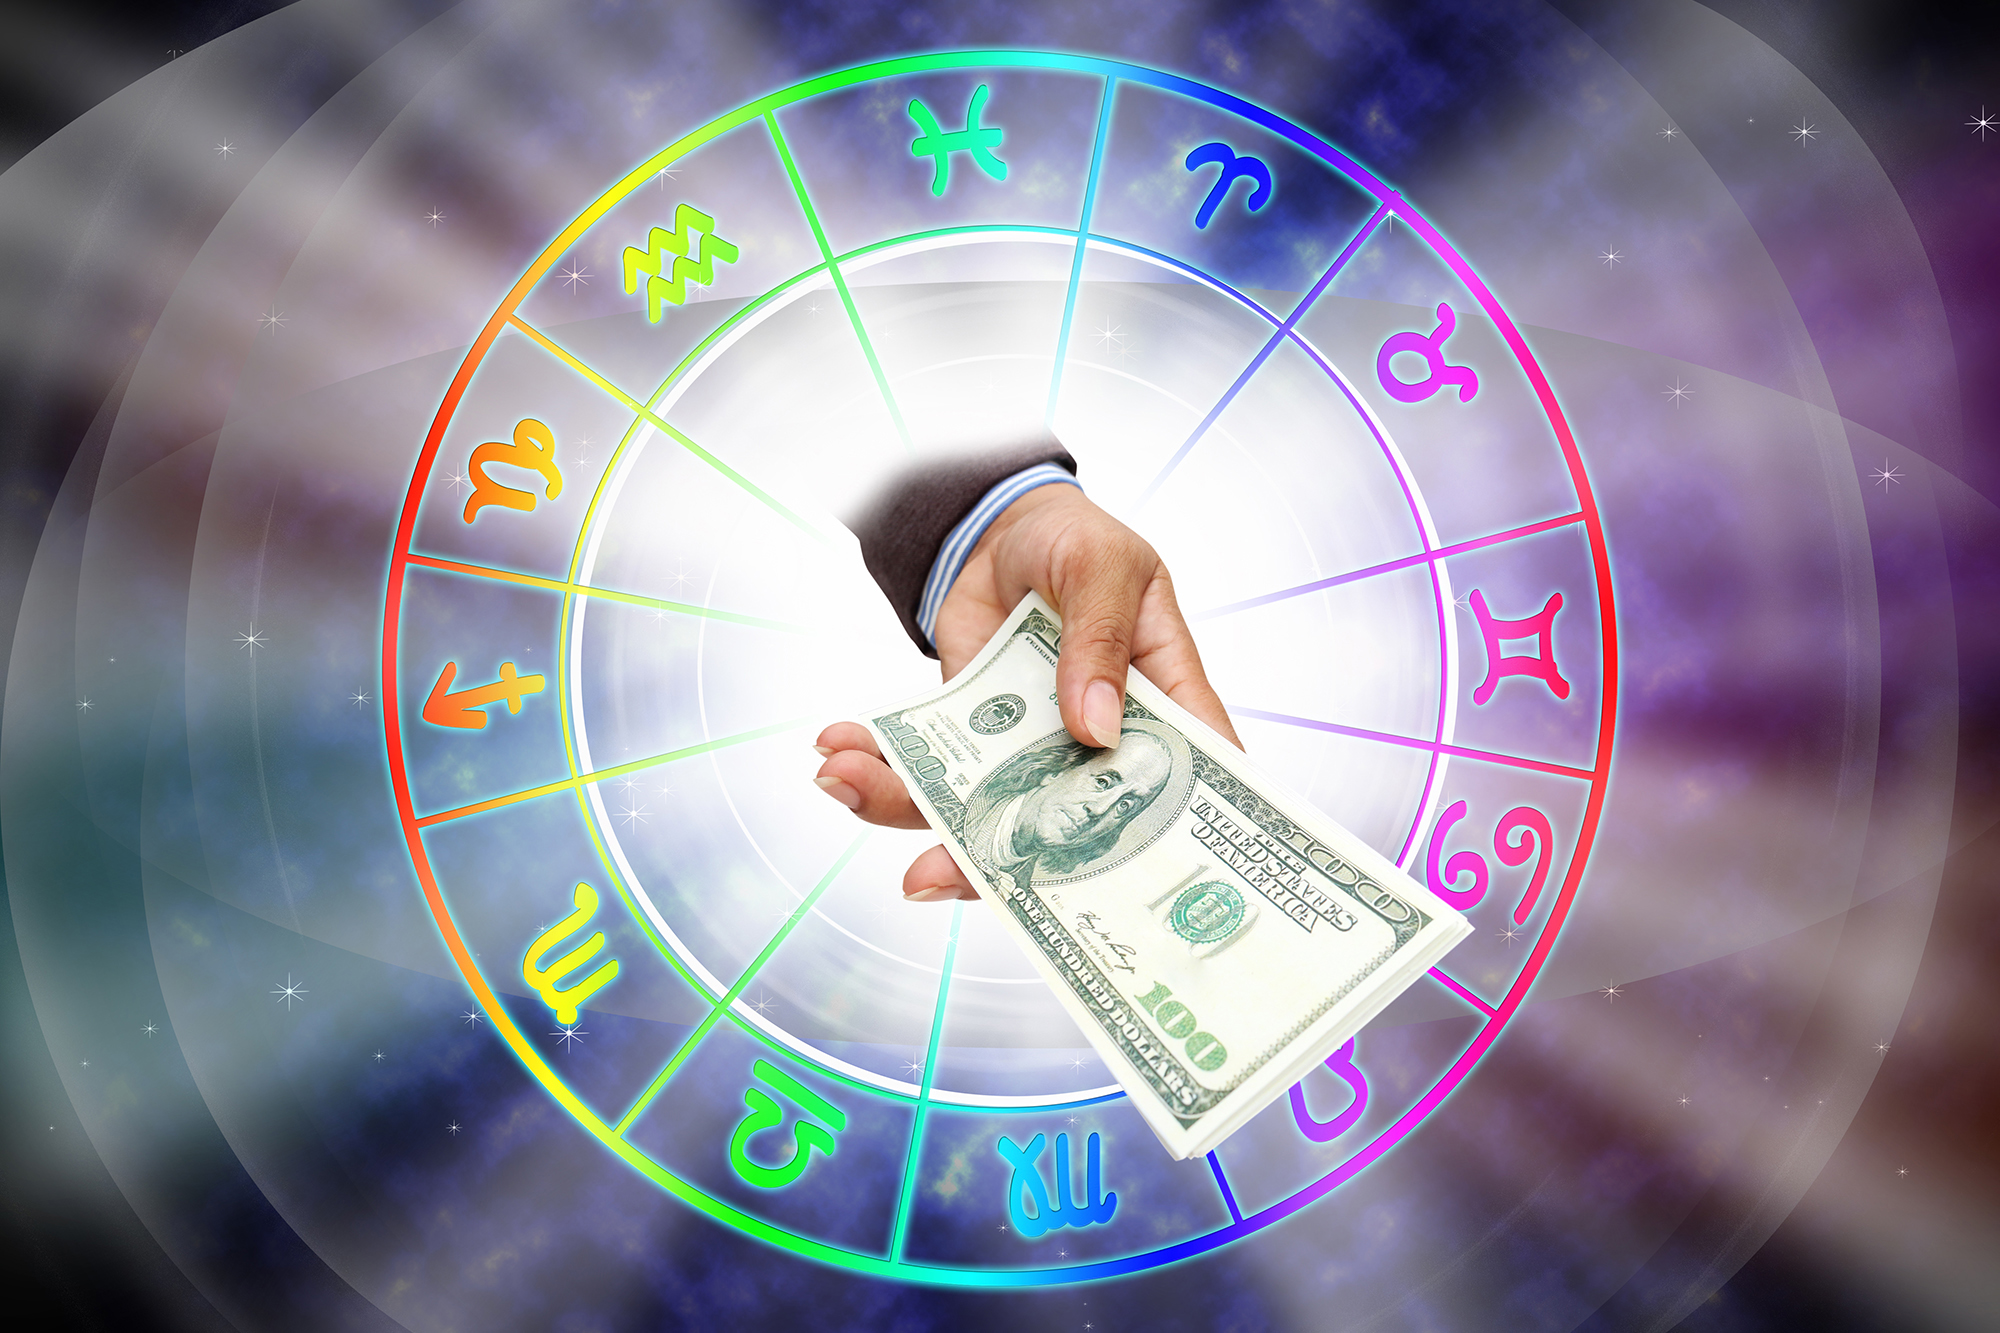 In astrology, much about financial strife and/or personal success can be gleaned from looking at the second, eighth and 11th houses within an individual birth chart.